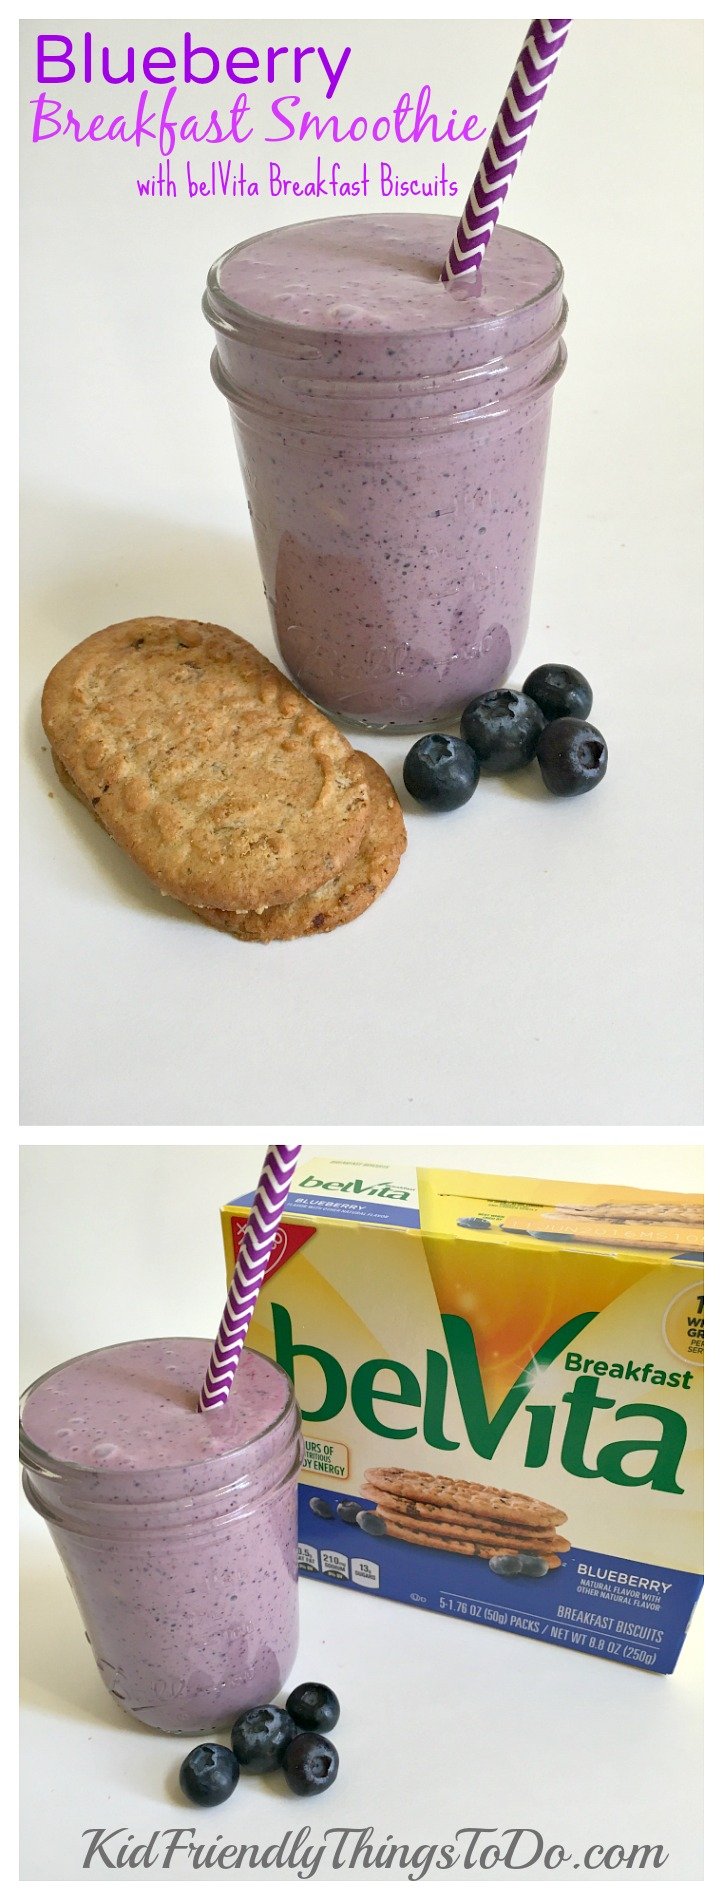 3 absolutely delicious Breakfast Smoothies all made with belVita Breakfast Biscuits! - KidFriendlyThingsToDo.com